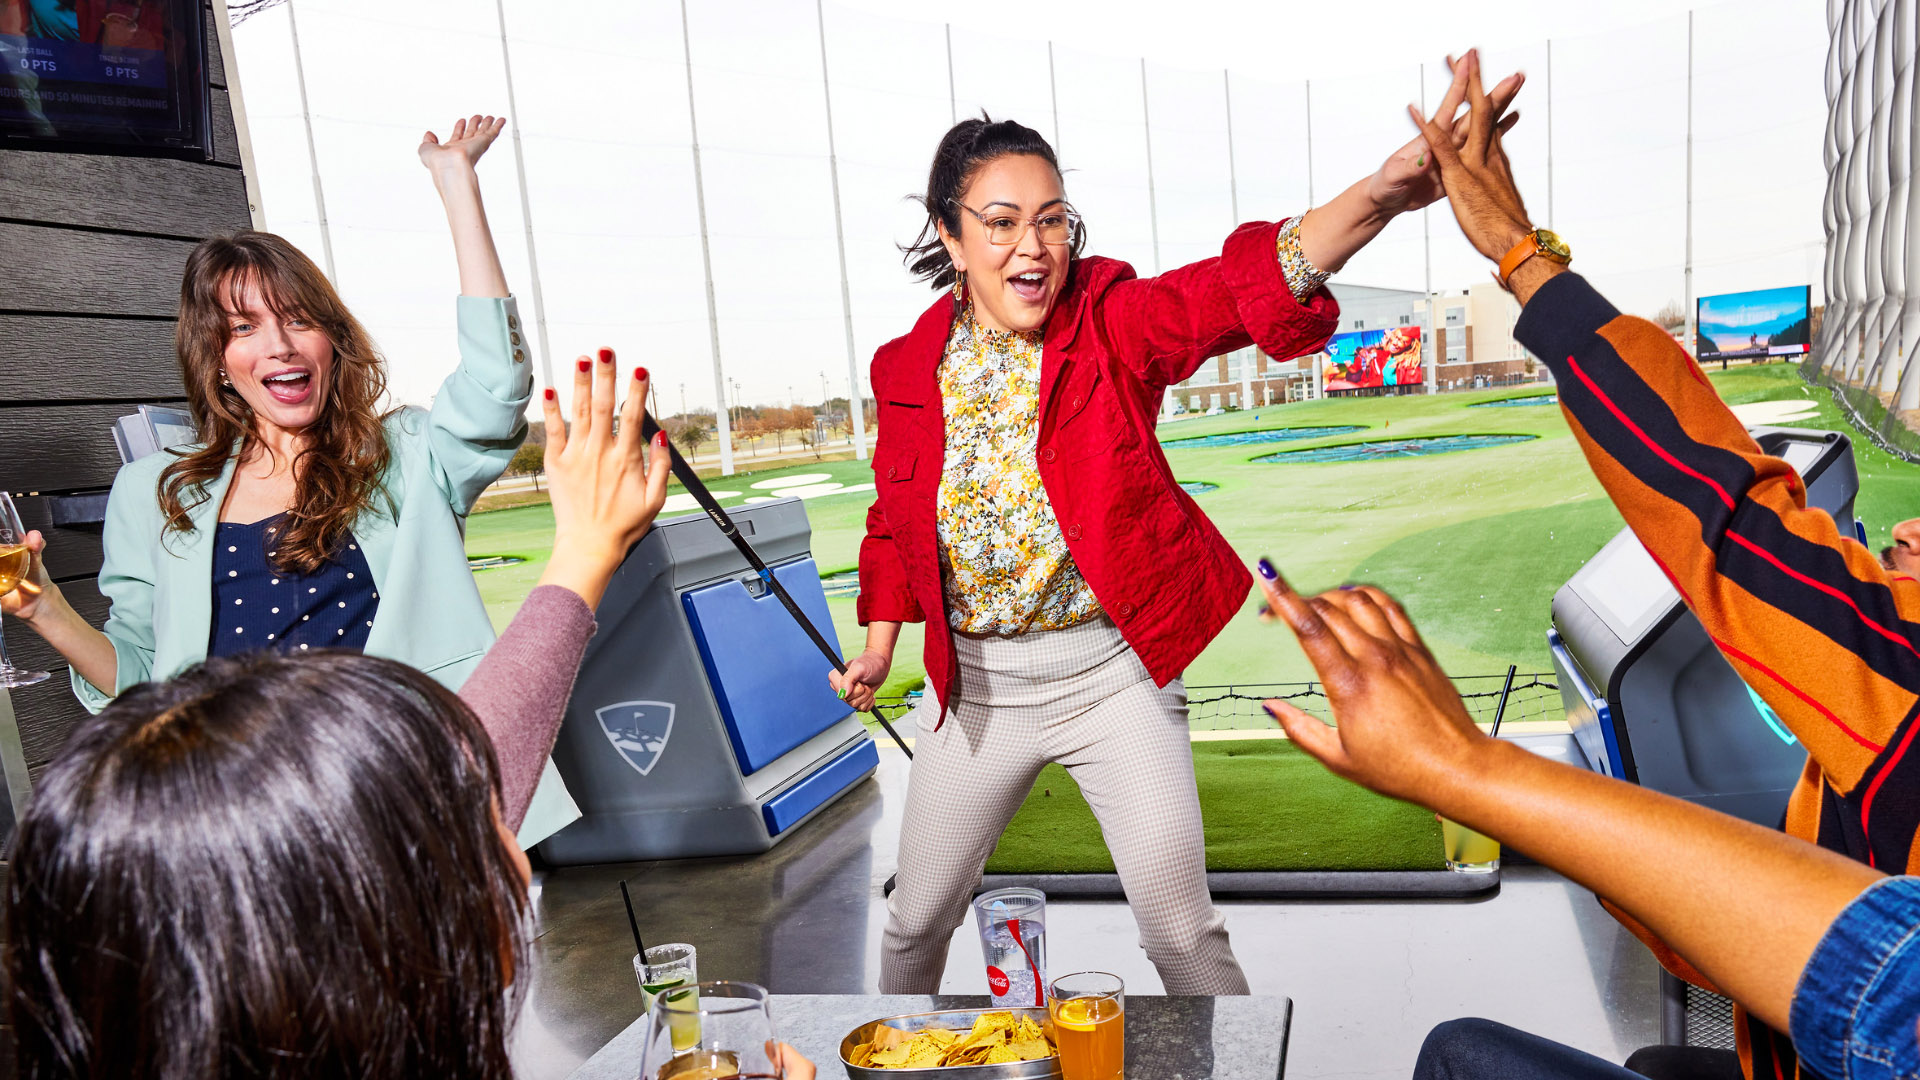 People playing at Topgolf